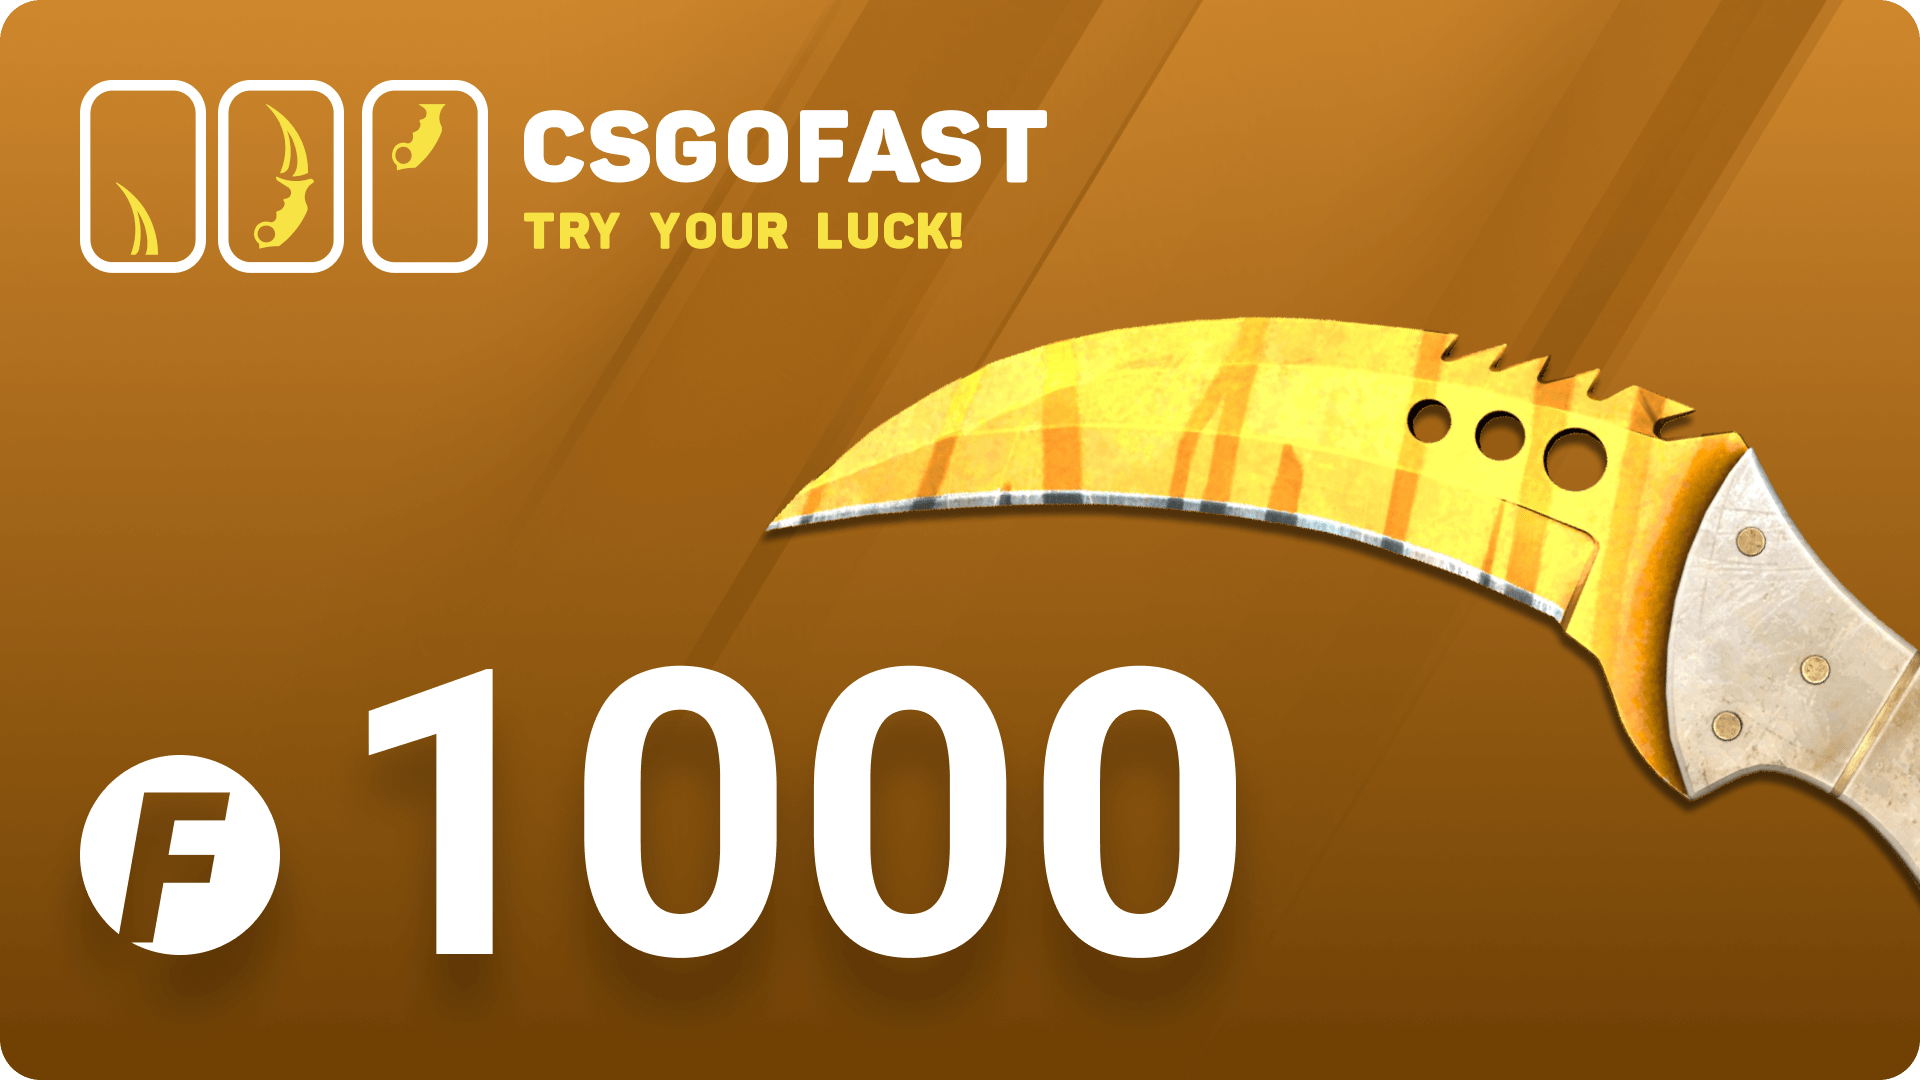 [$ 695.26] CSGOFAST 1000 Fast Coins Gift Card